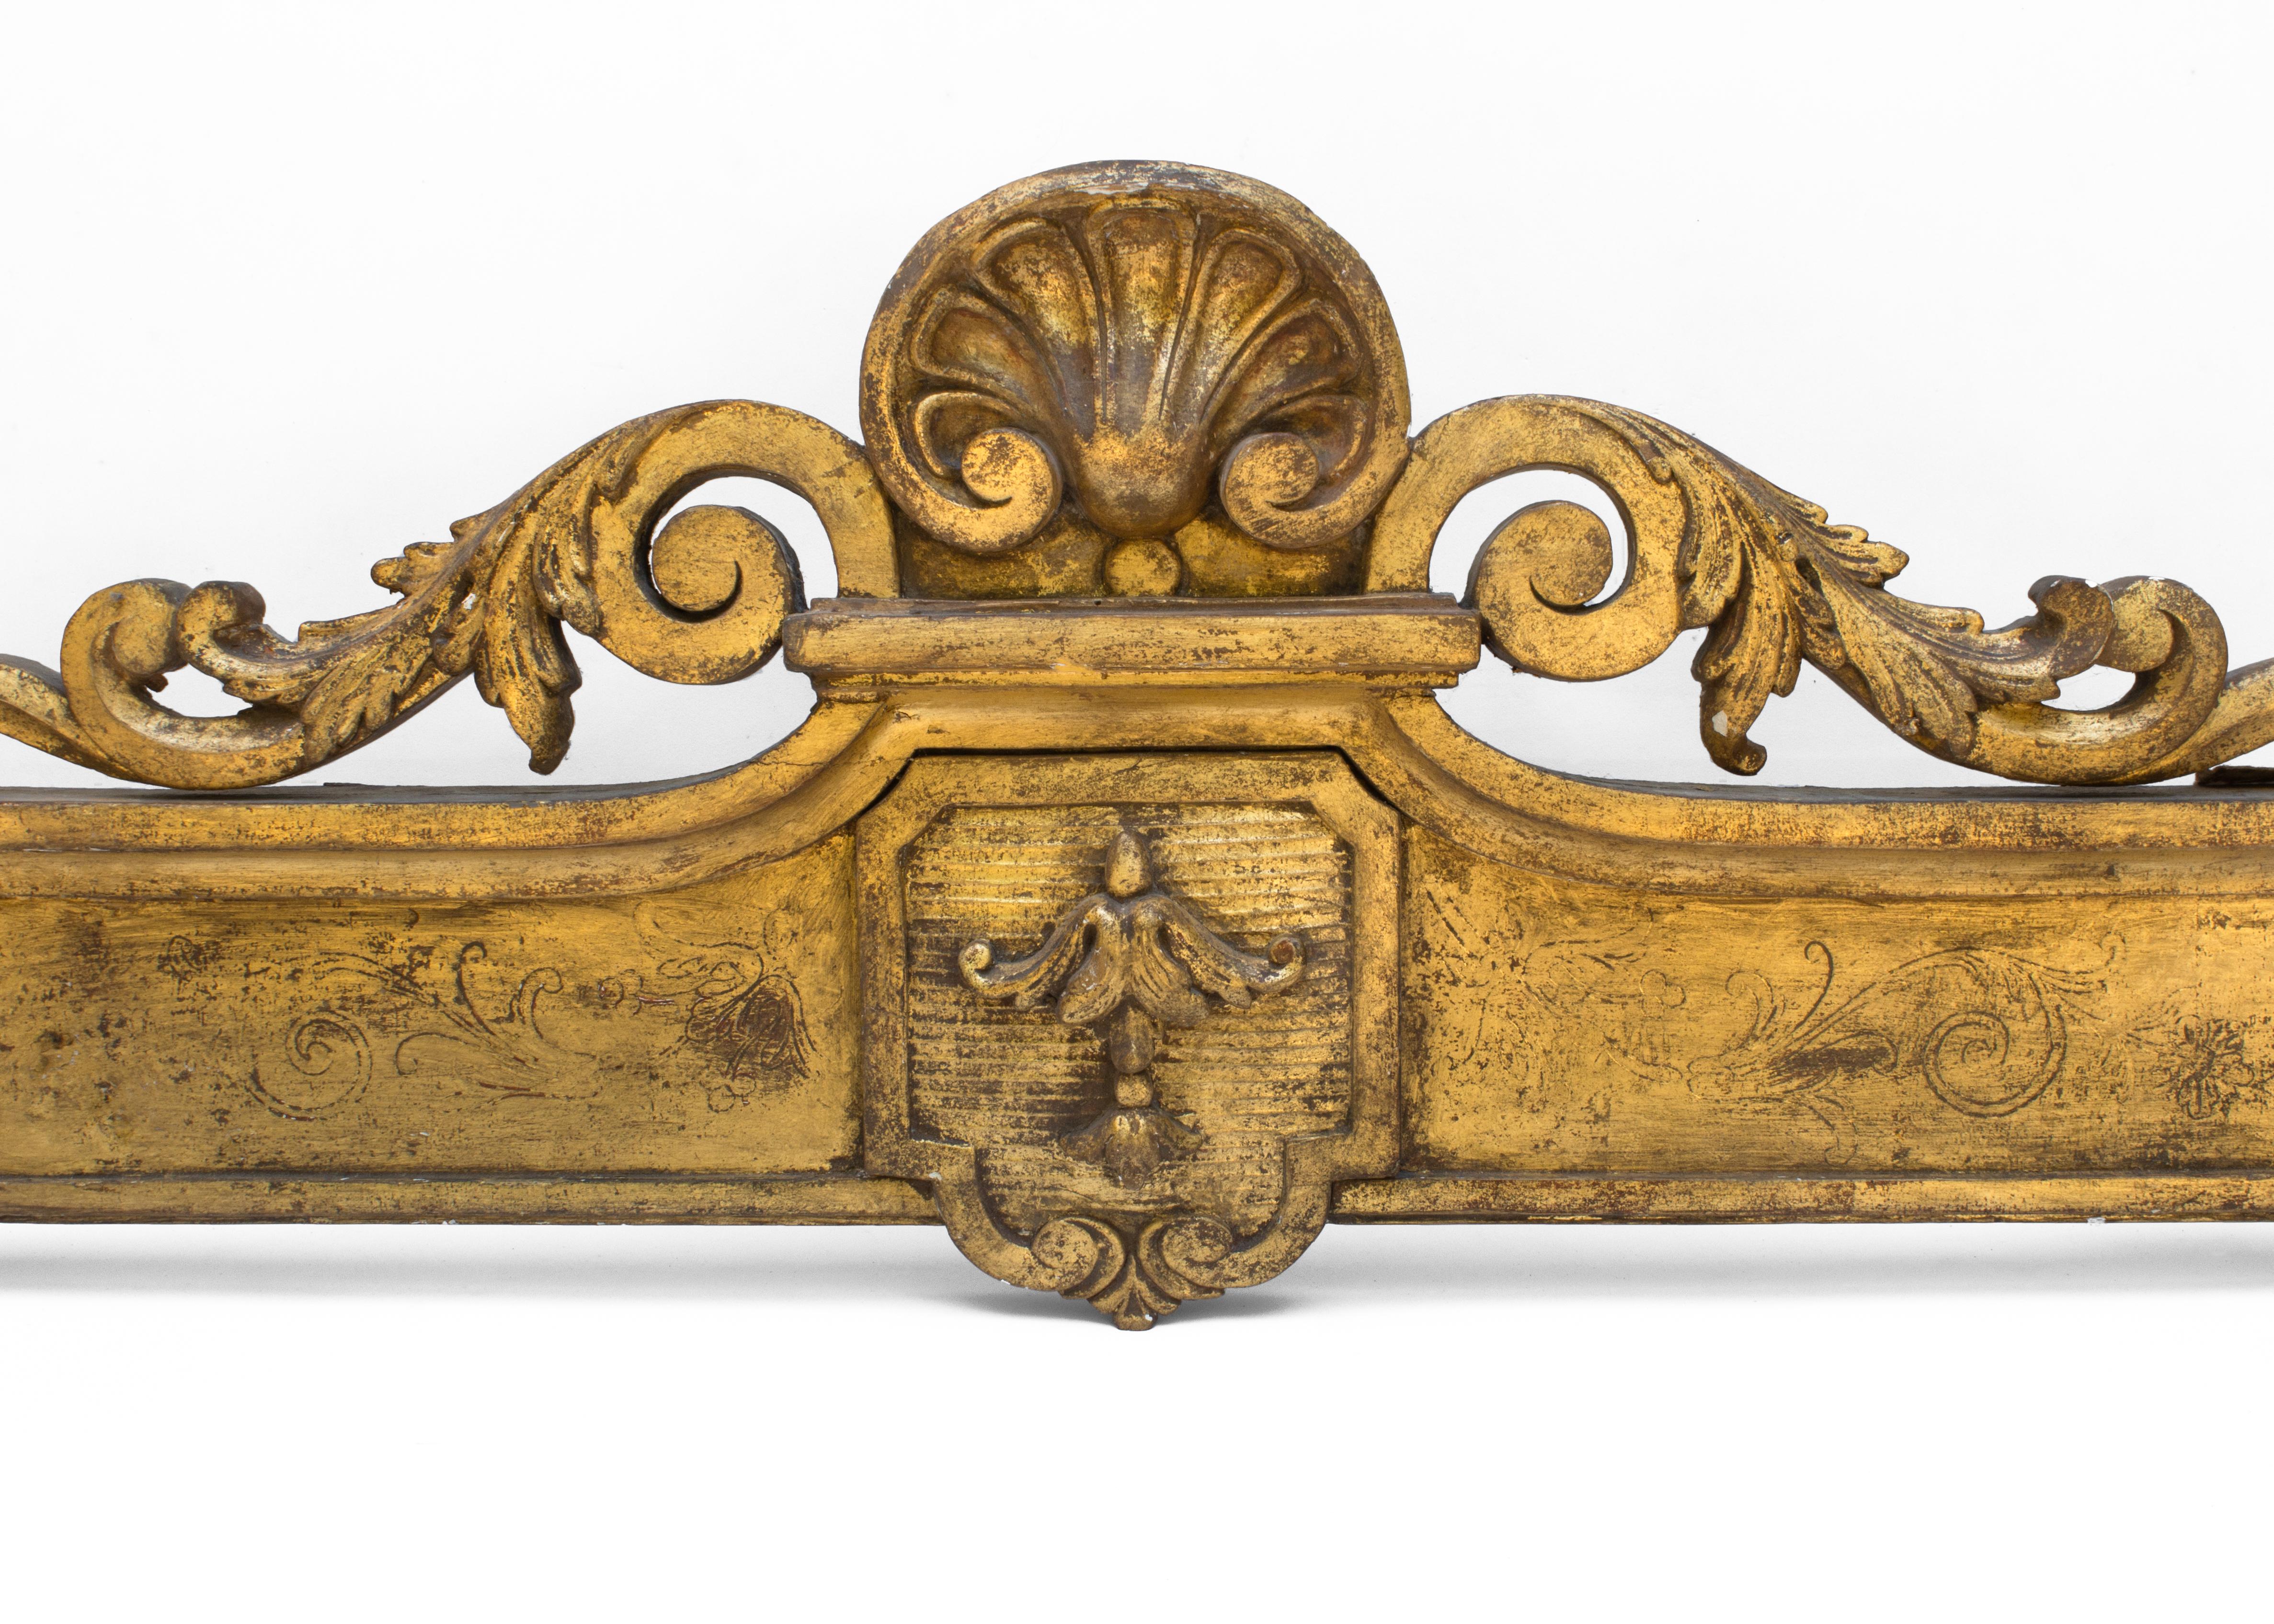 18th century Irish Georgian gold leaf curtain pelmet. This can also be used as a canopy bed corona. It is from a stately home in County Kildare, Ireland. It has intricate and detailed wood carvings with inscriptions on the pelmet.